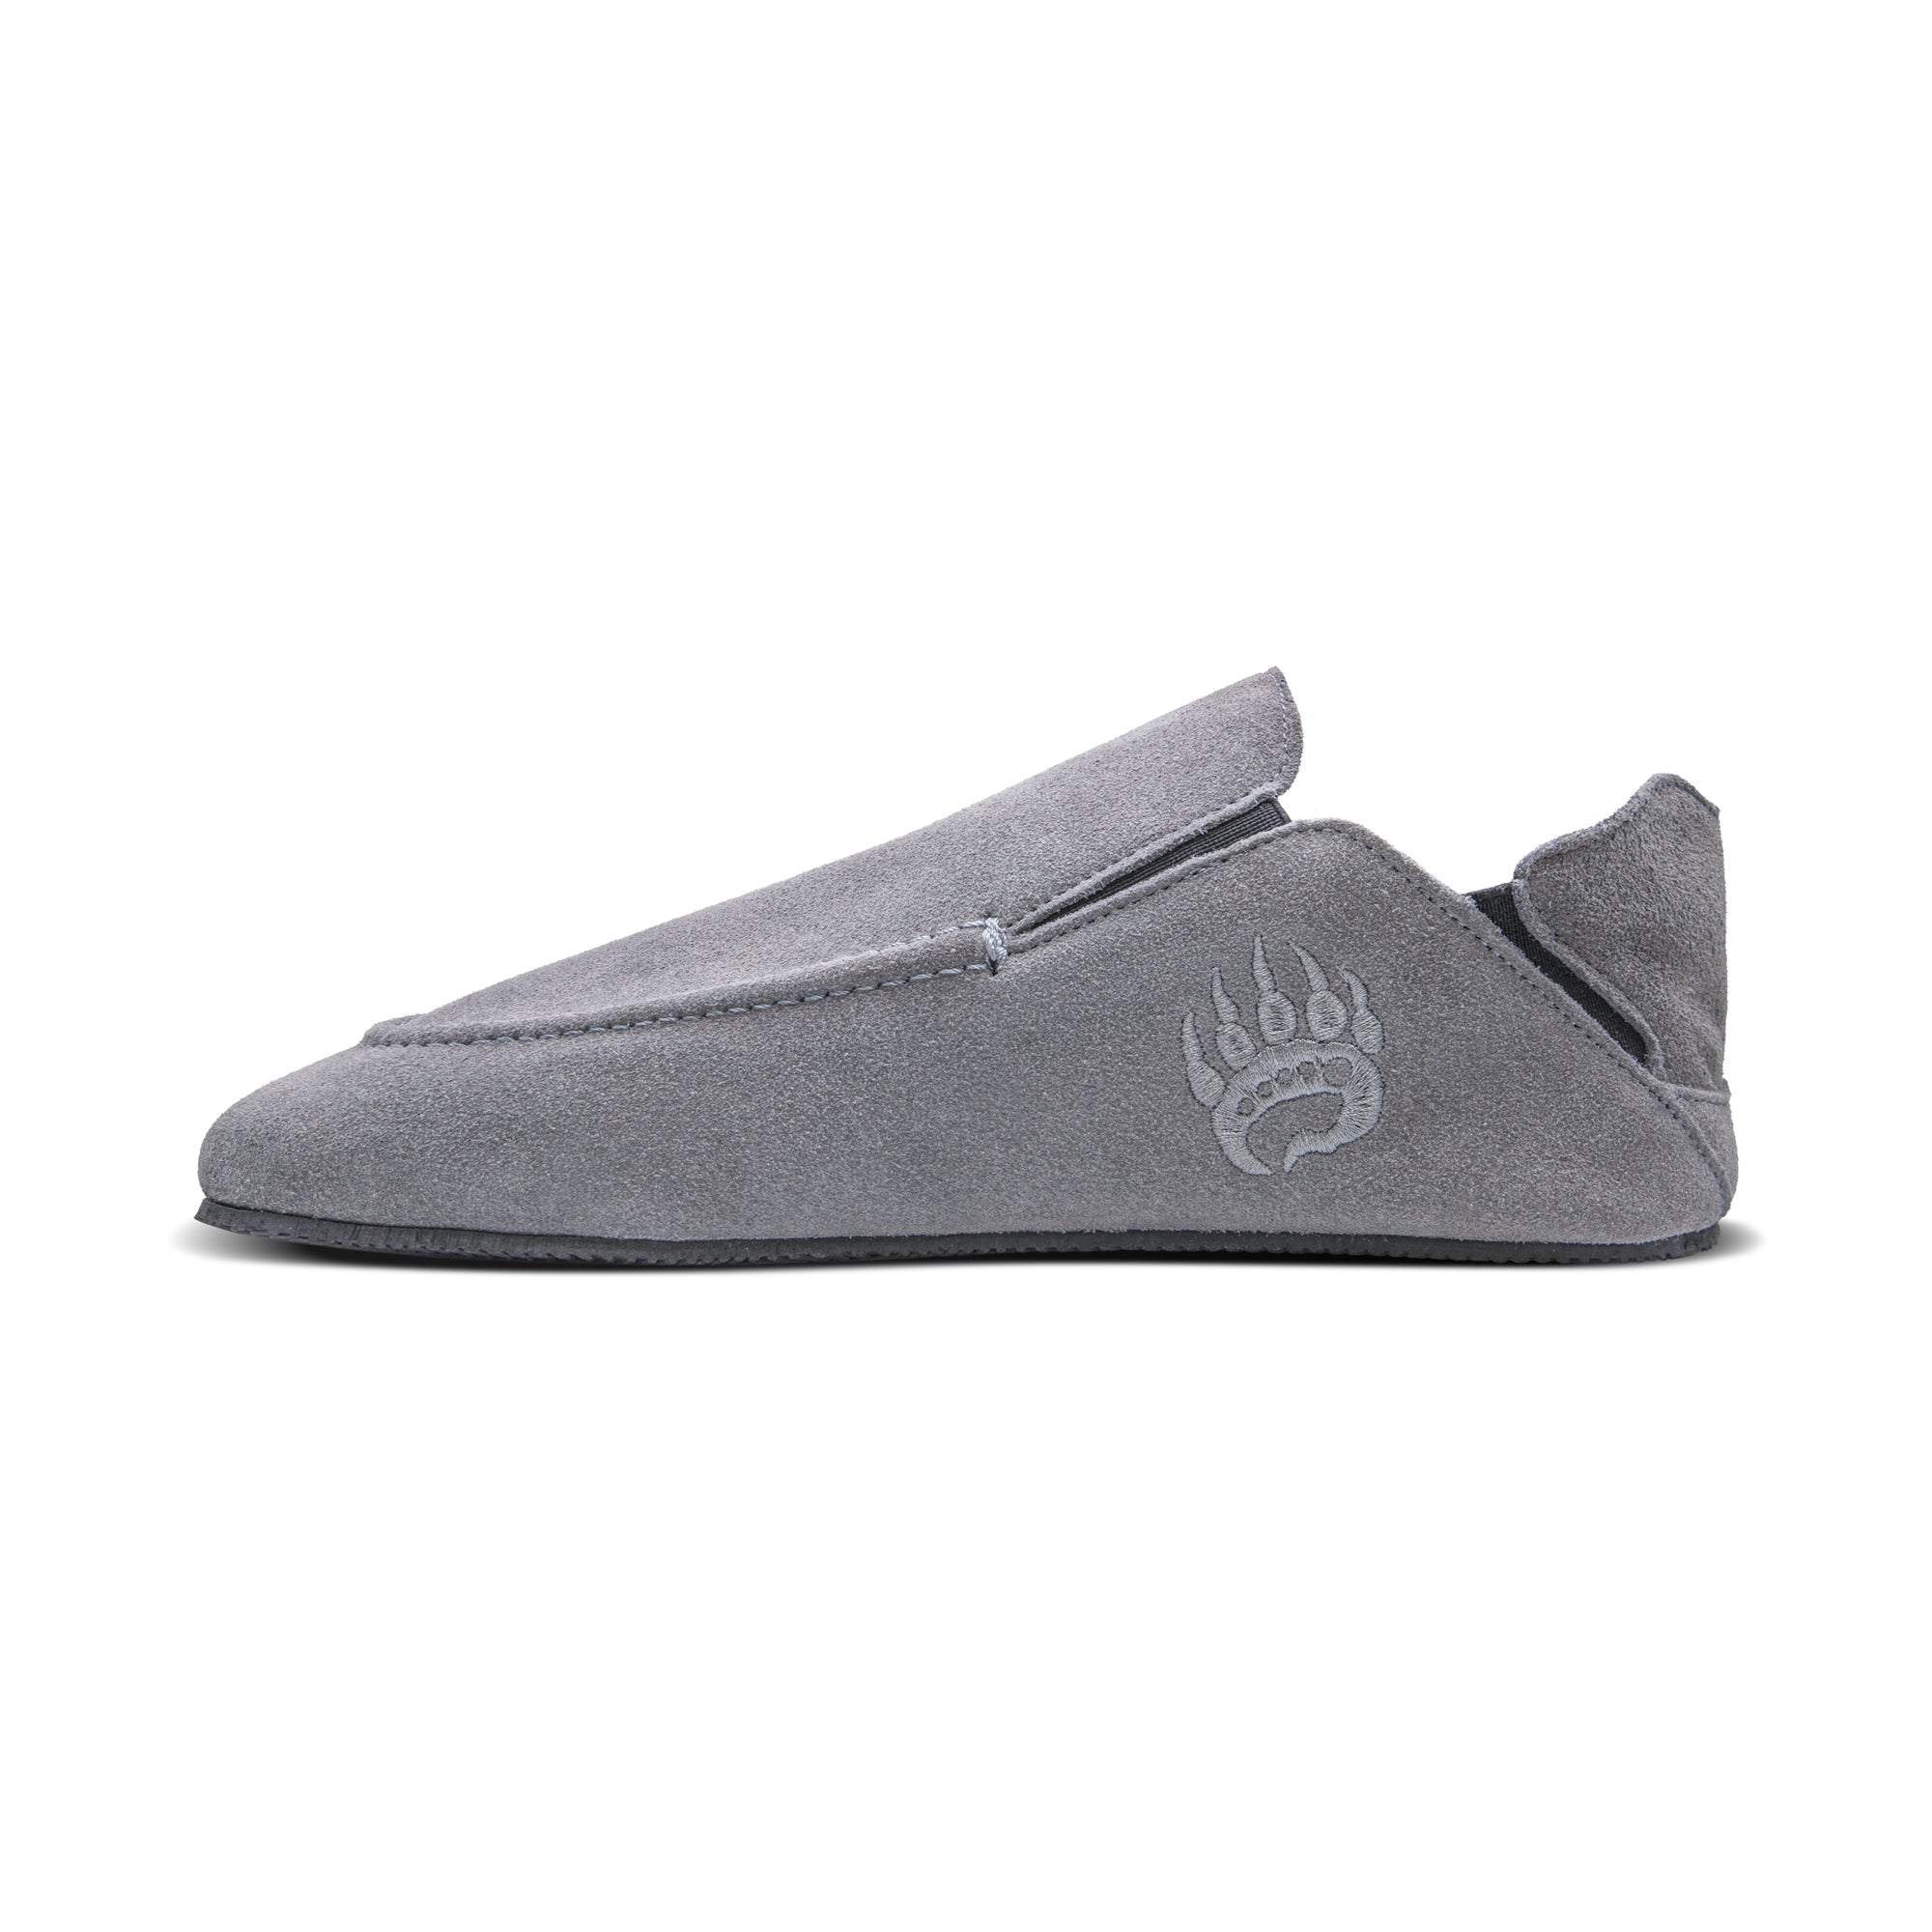 A single Oso Suede slipper in Ice Grey with a white paw print logo on the side, made from suede leather, offers a barefoot experience. The slipper features a low back and a round toe design. Brand Name: Bearfoot